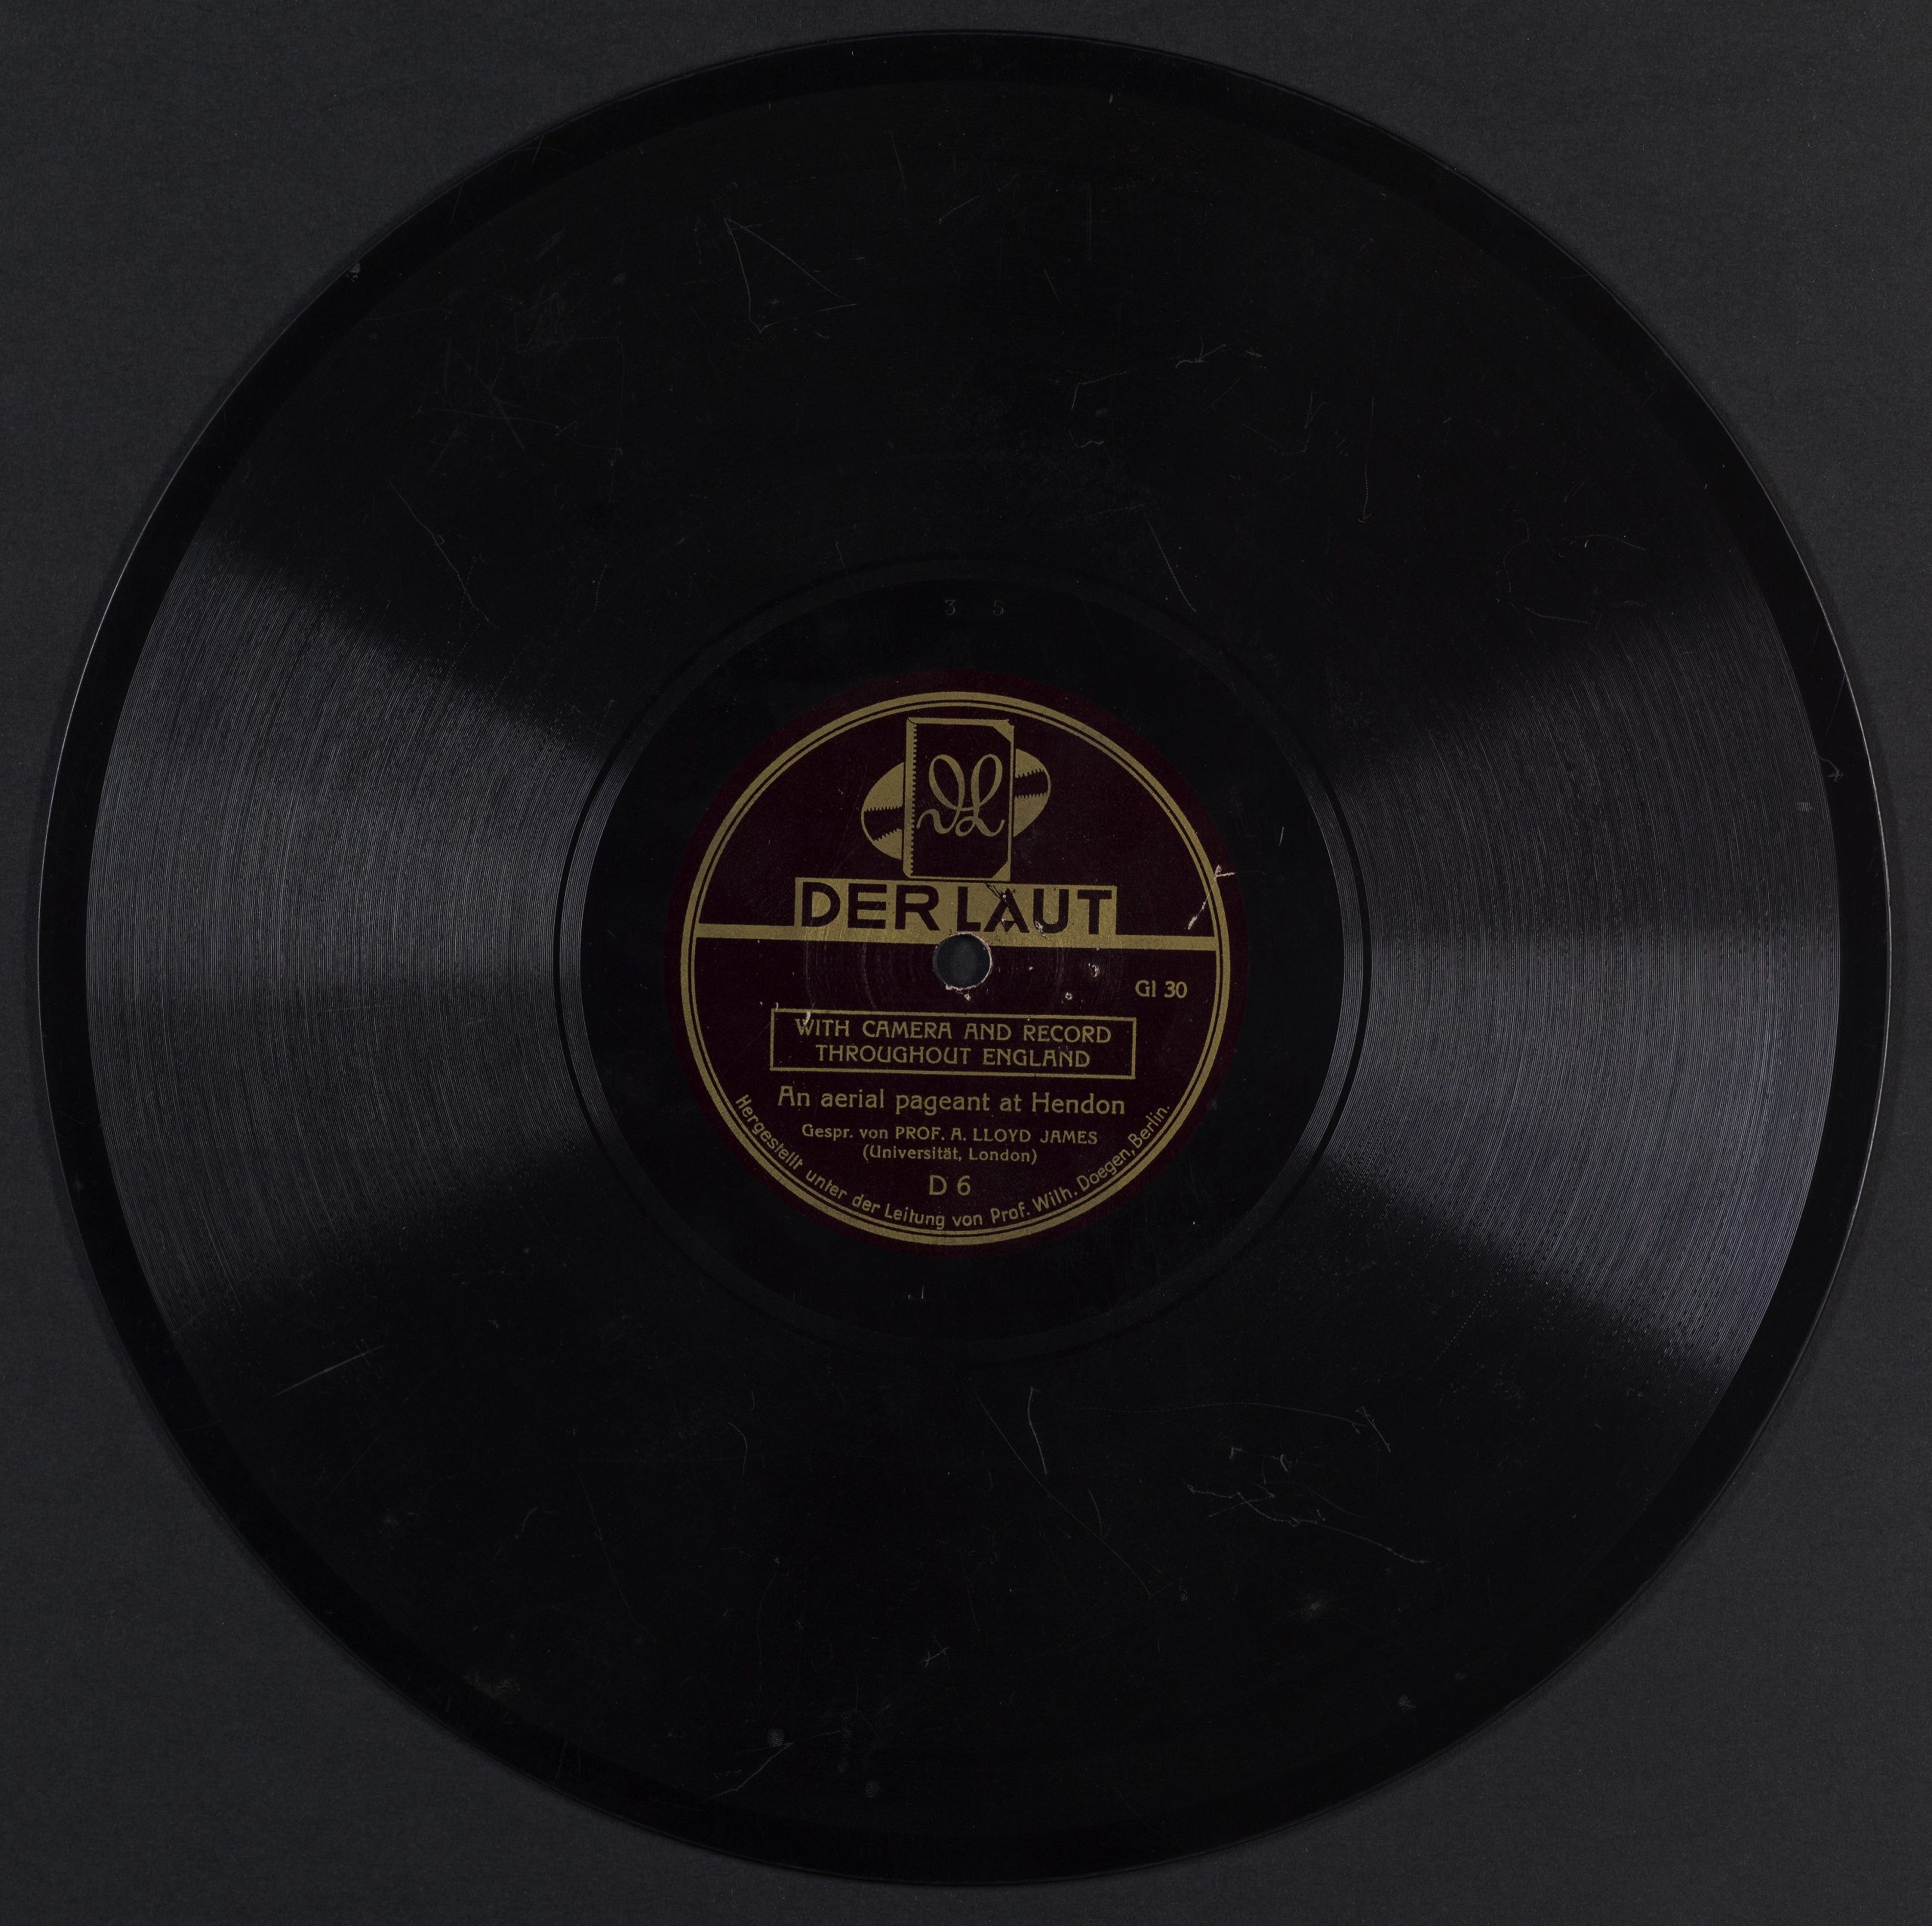 DHM Recording T 98/10 – With Camera and Record, Disc 6, Side A: “The Aerial Pageant at Hendon”